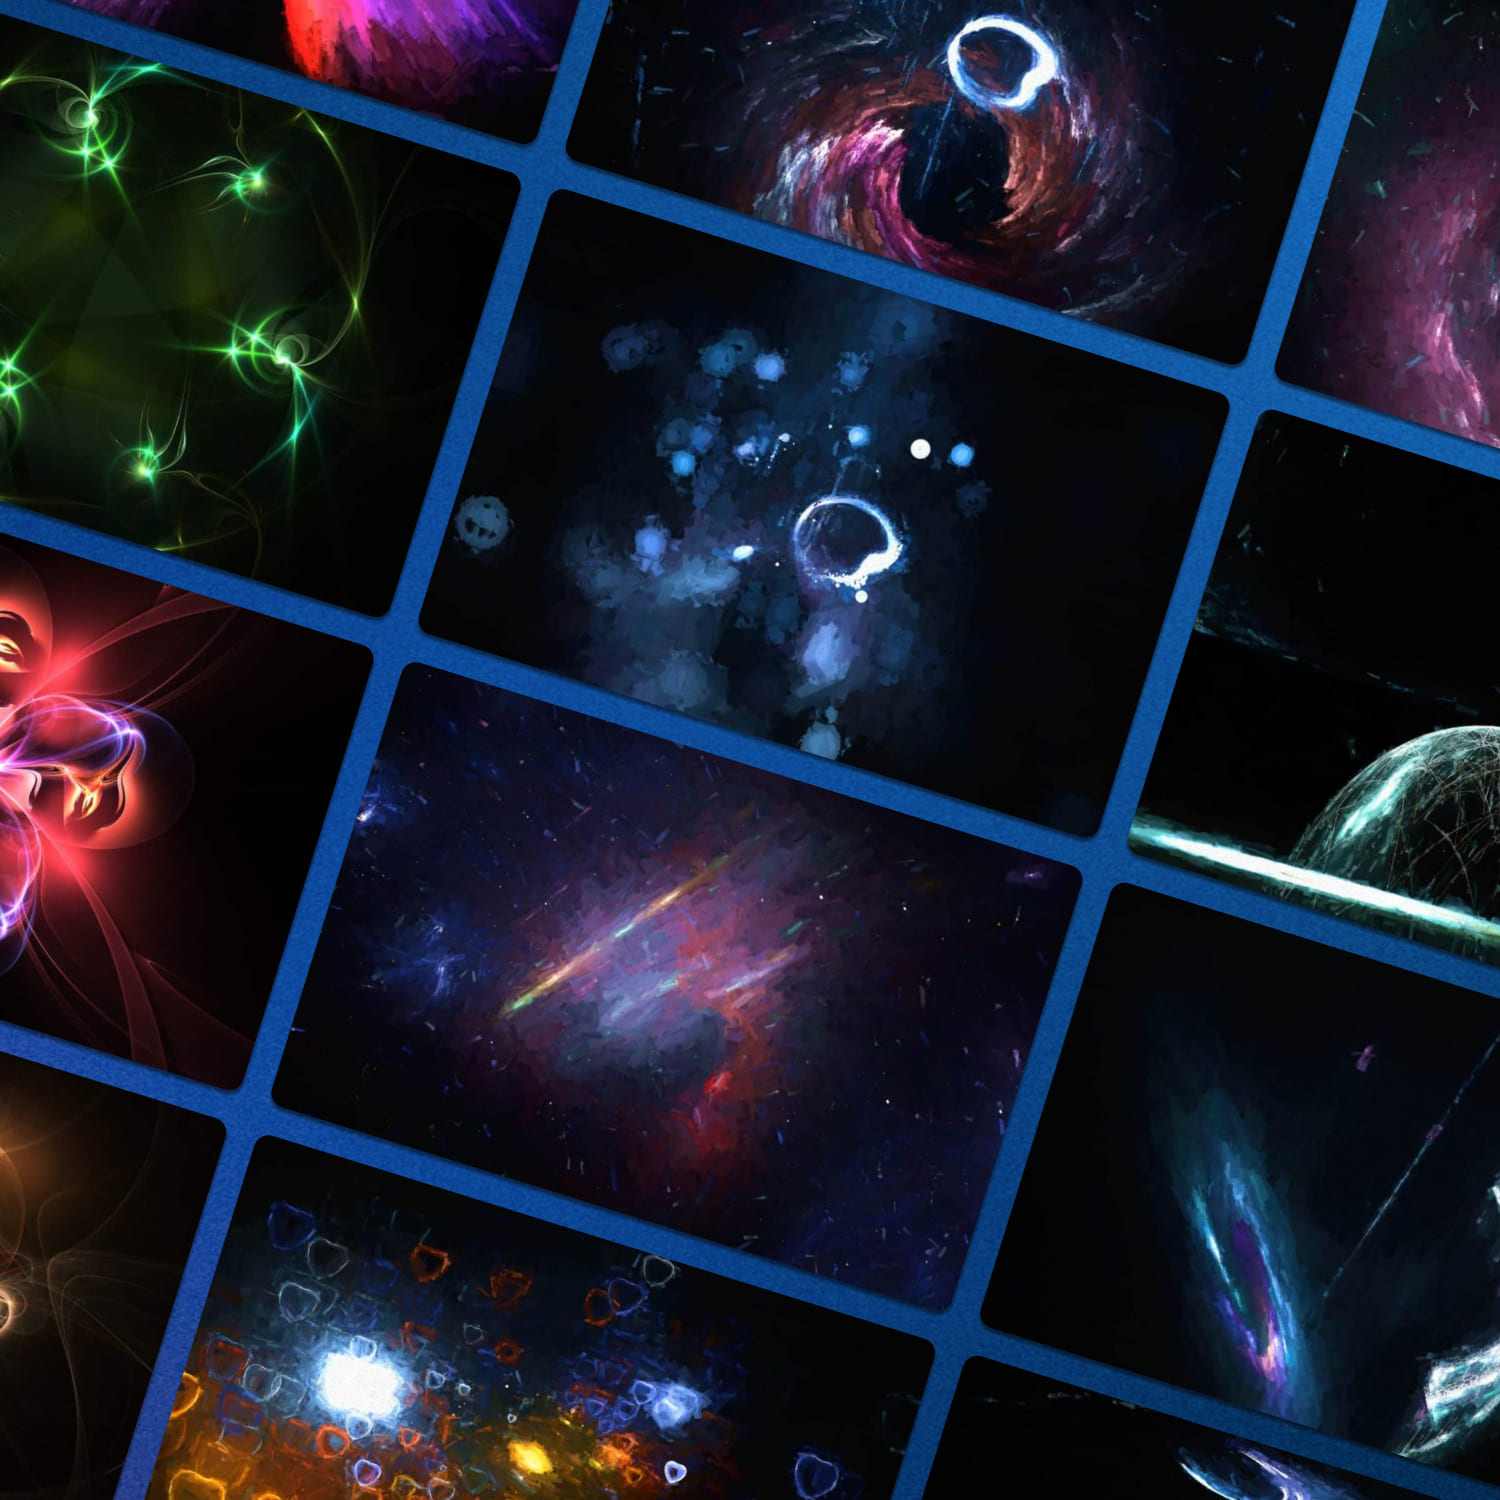 3000+ Space Backgrounds and Textures Collection – Vol.2 cover.